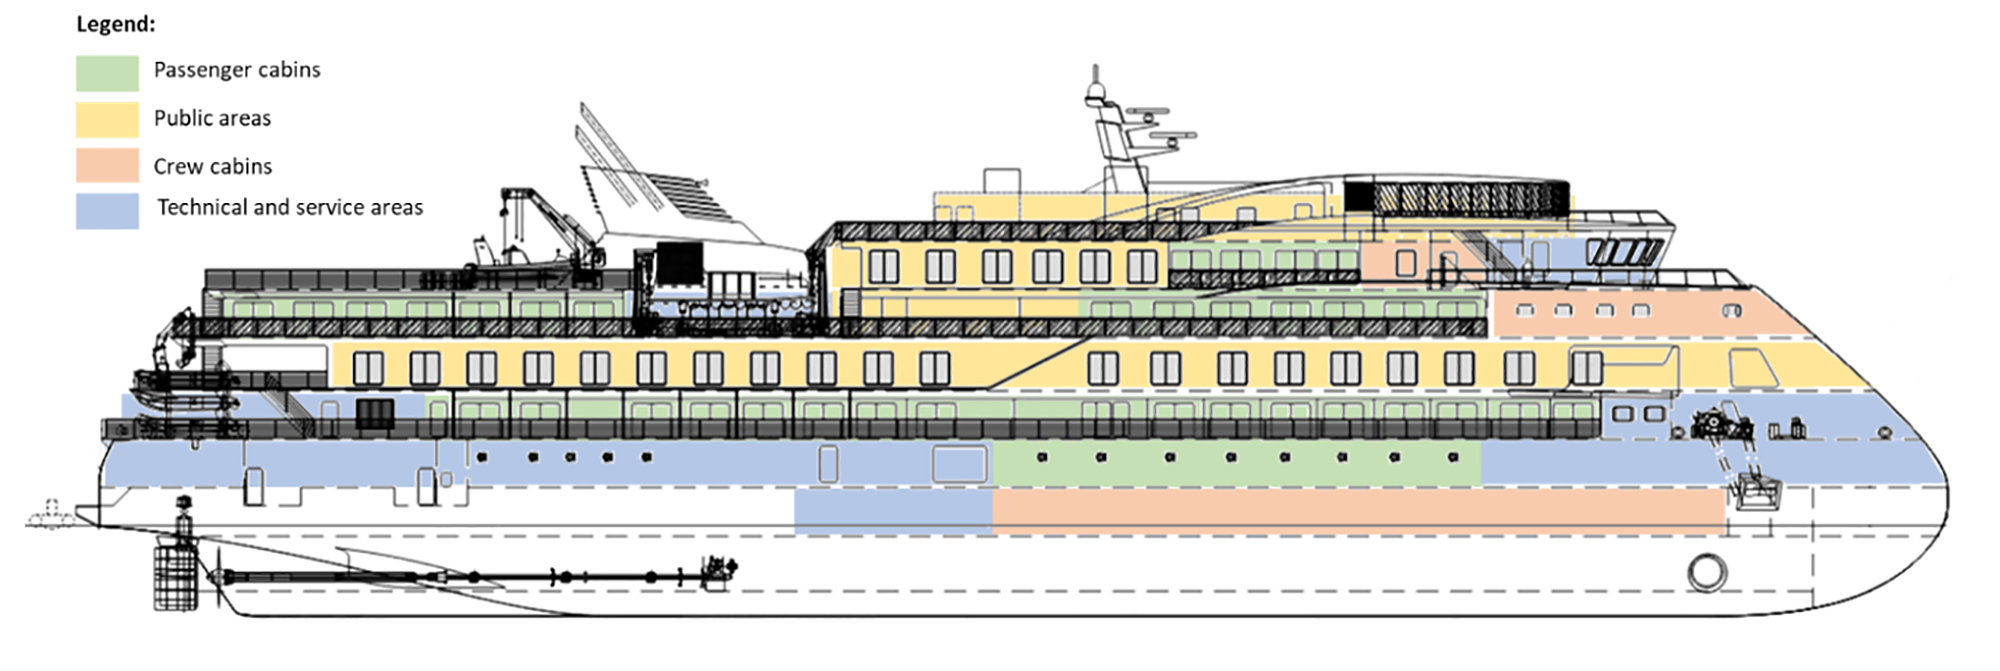 The location of the passenger cabins (green) and public areas (yellow) have been placed in the centre of the vessel.